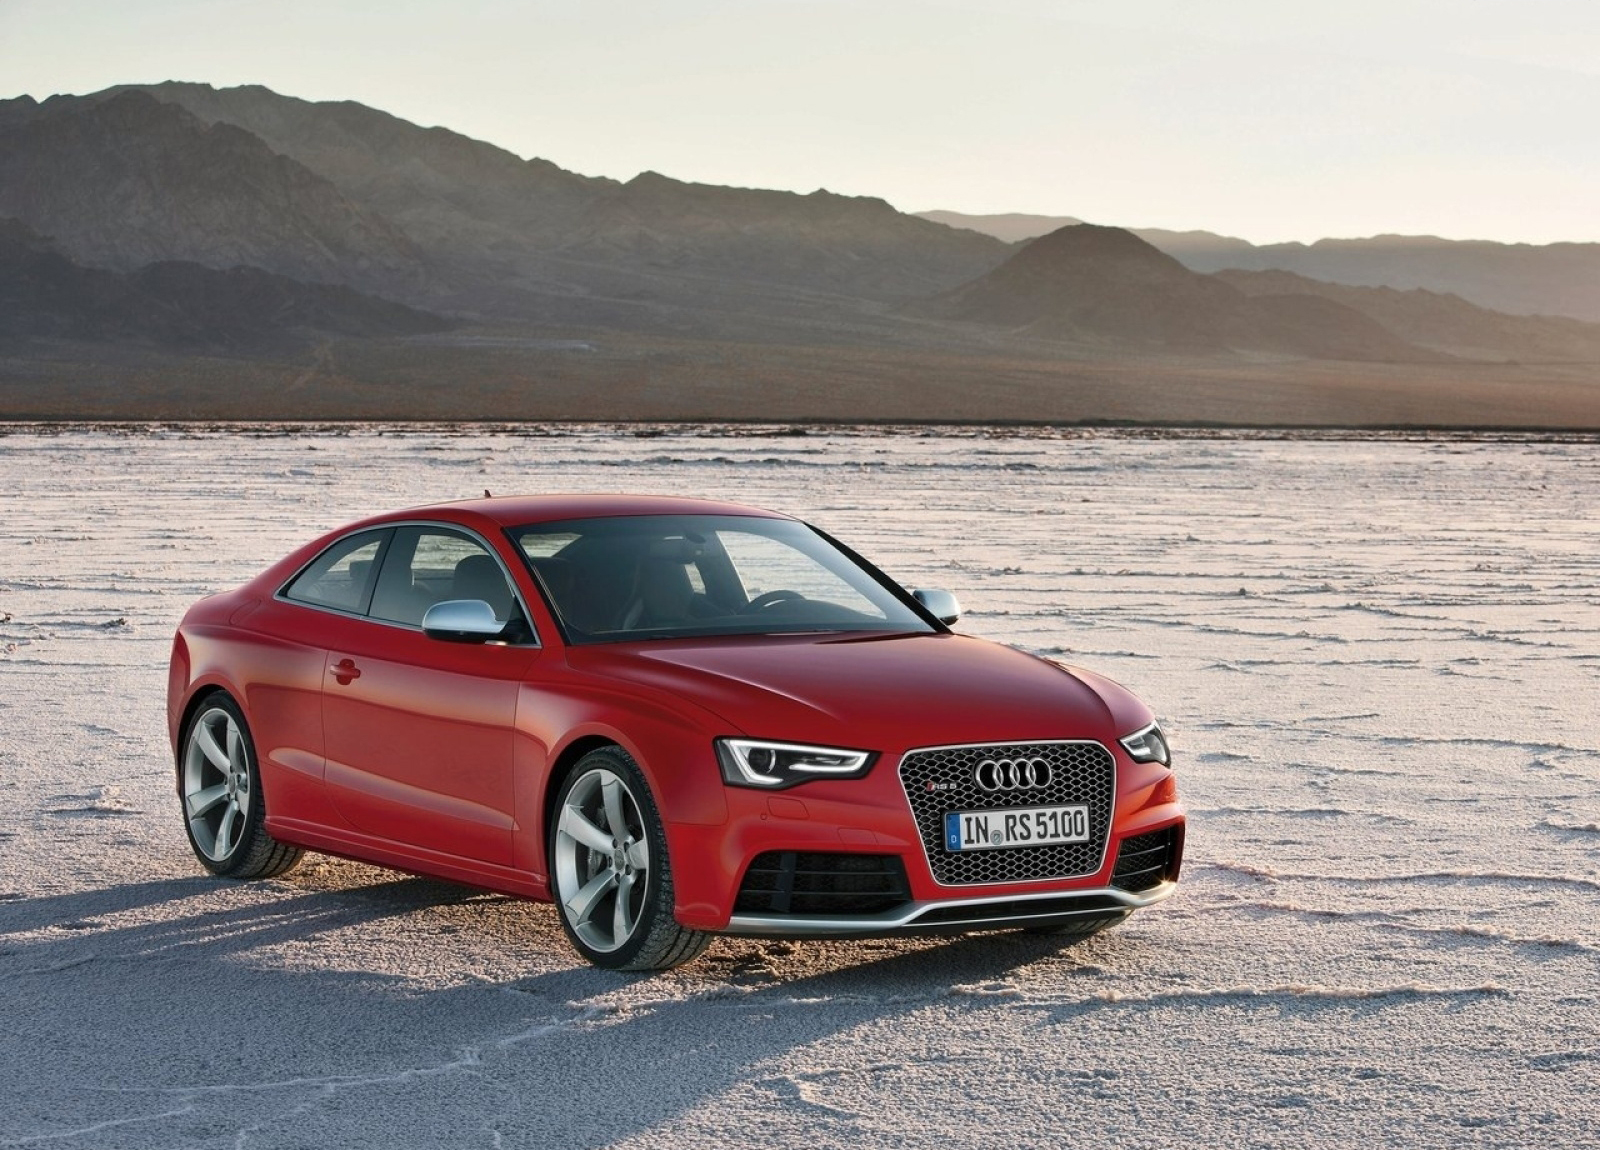 Audi Rs5 HD Wallpaper The World Of